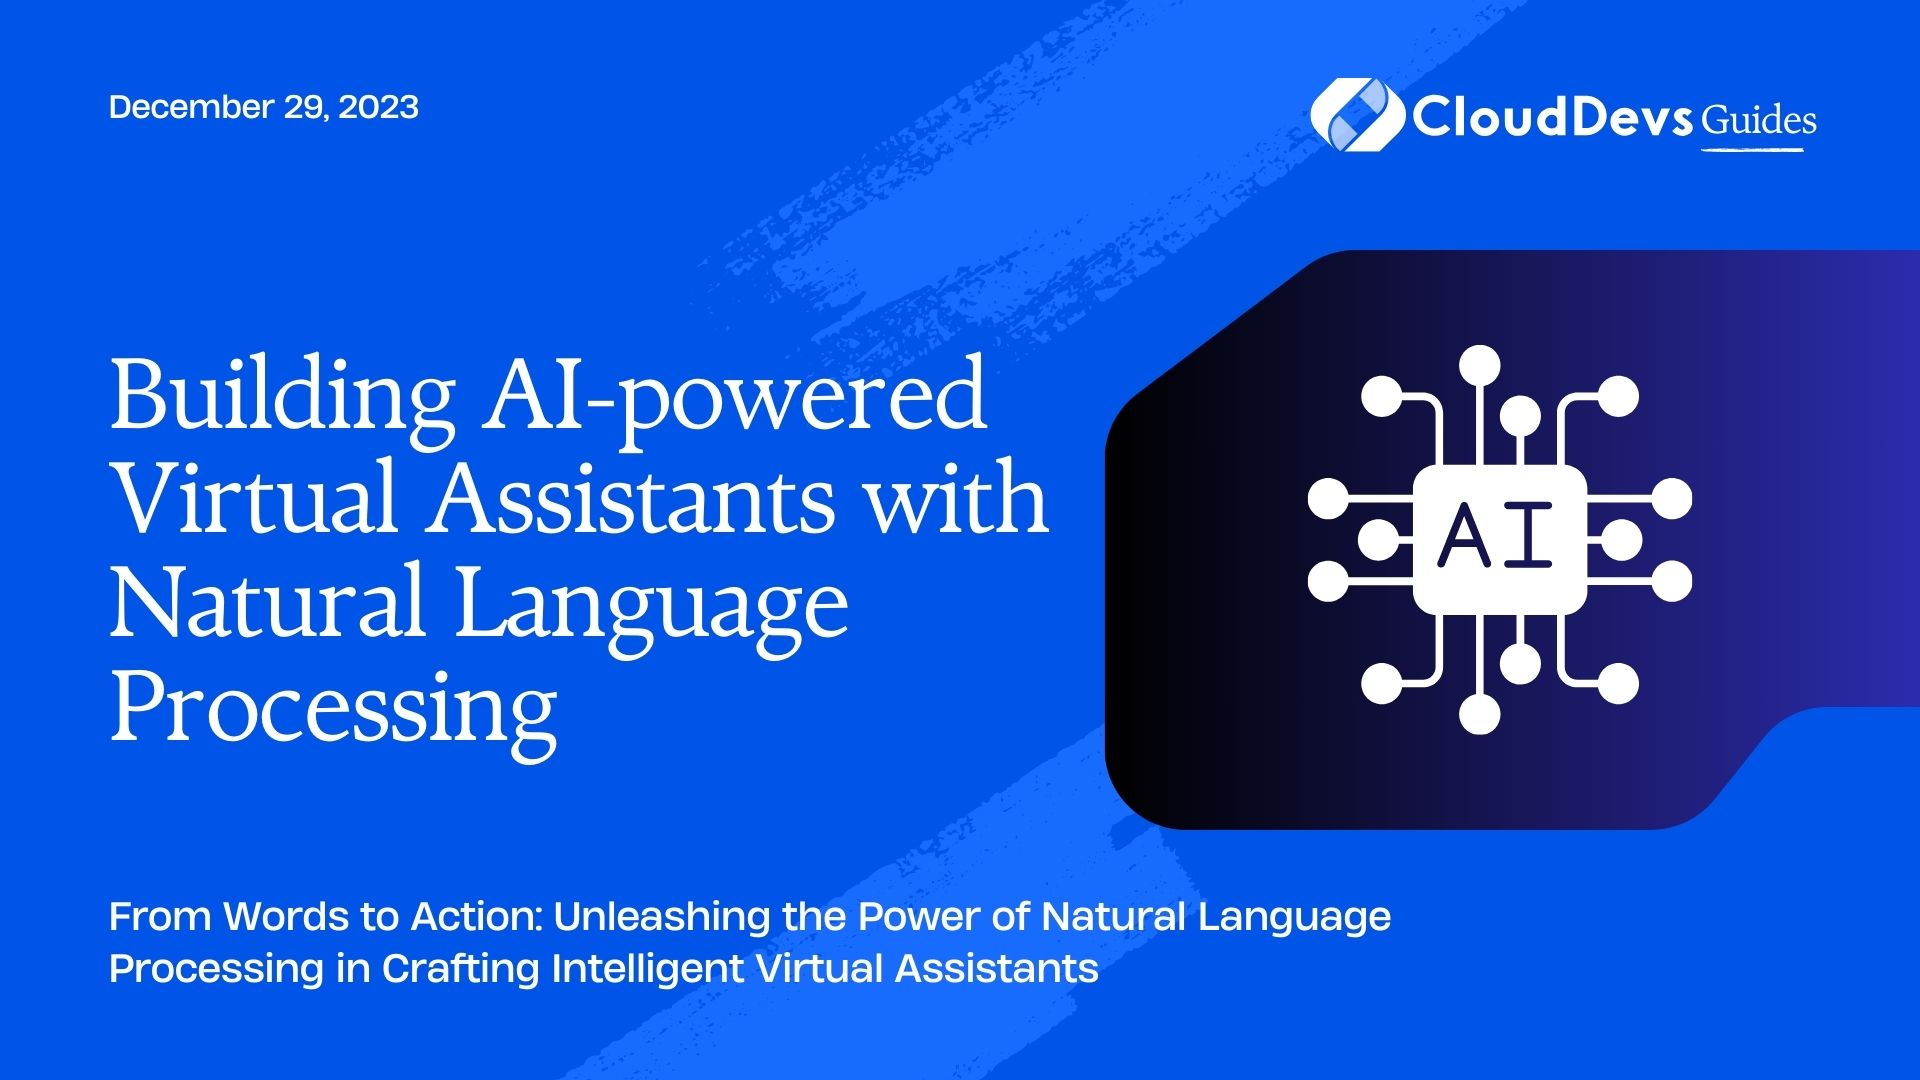 Building AI-powered Virtual Assistants with Natural Language Processing